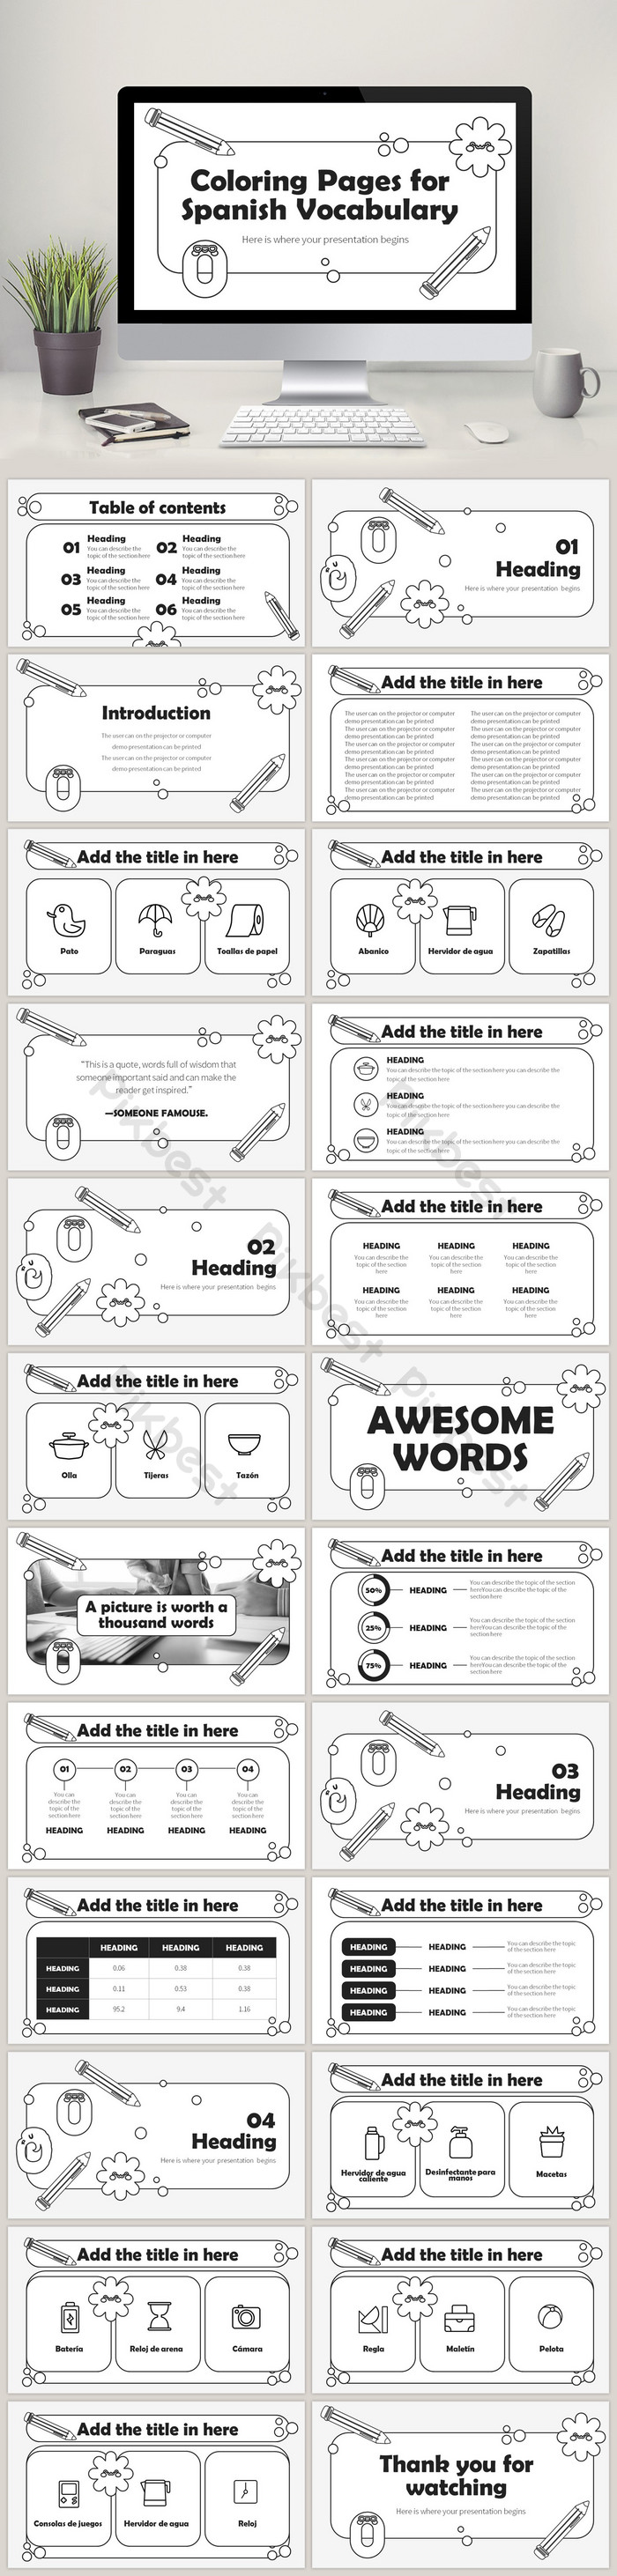 Coloring pages for spanish vocabulary white powerpoint pptx template free download